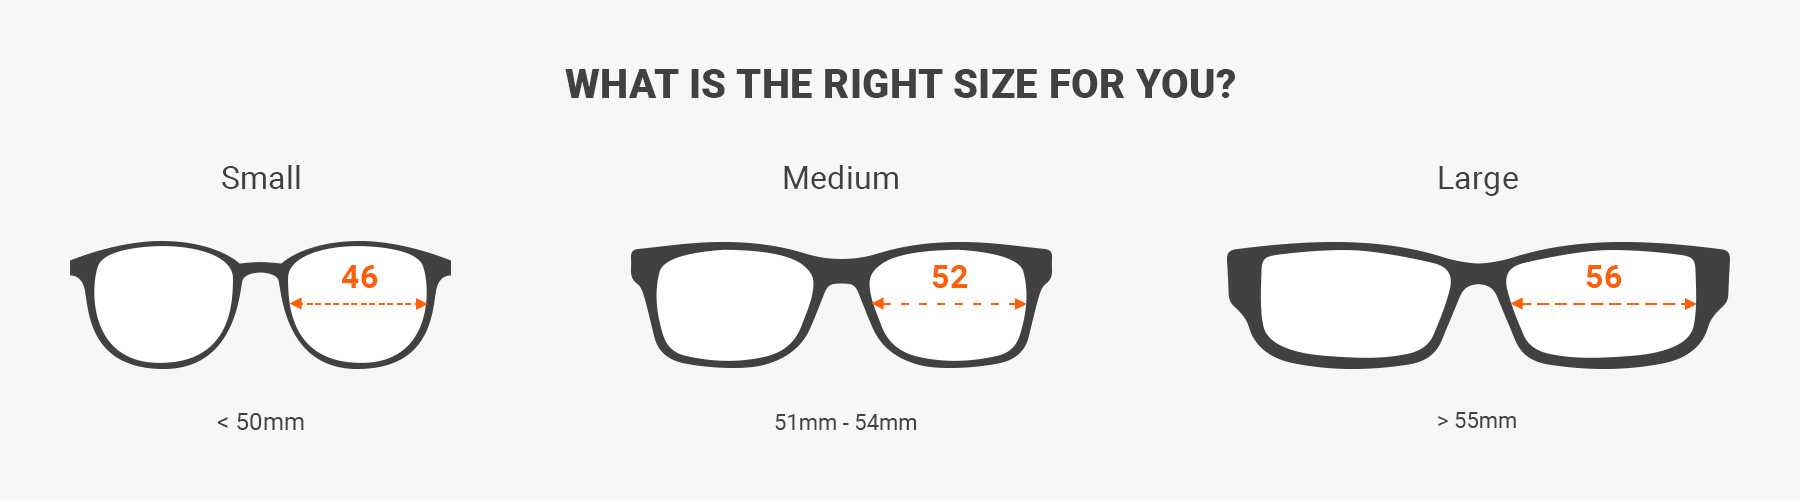 how to read glasses measurements - Measure glasses and sunglasses size with a ruler